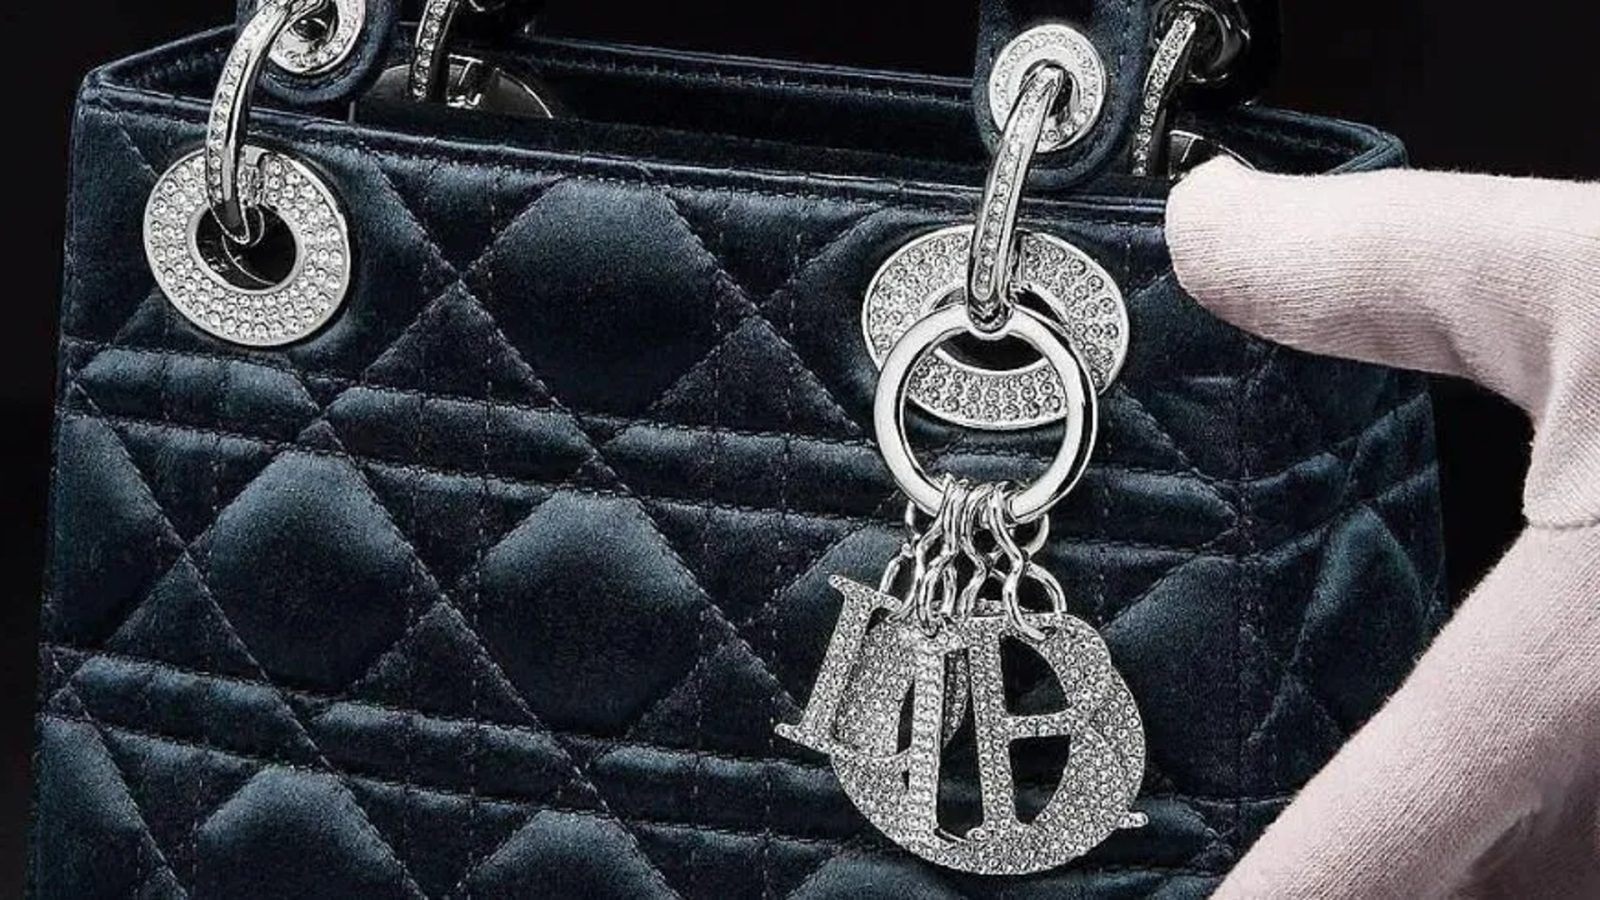 Lady Dior Pouch  THOROUGH Review 